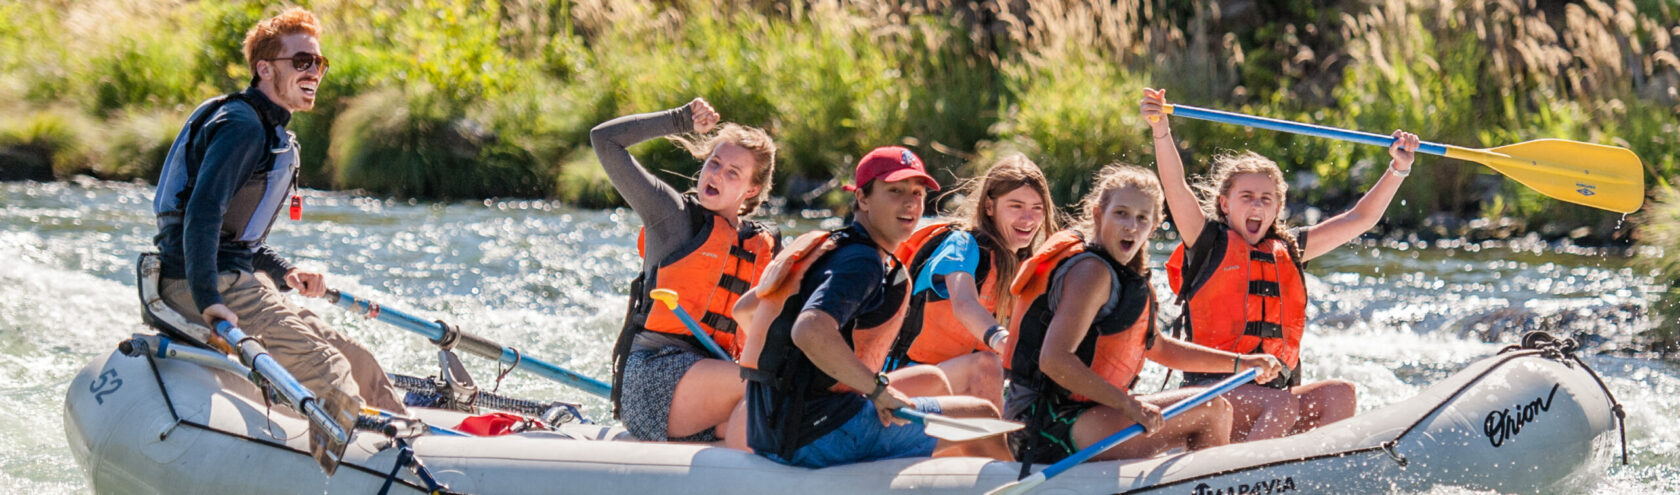 group of students on a araft laughing and celebrating passing through whitewater rapids